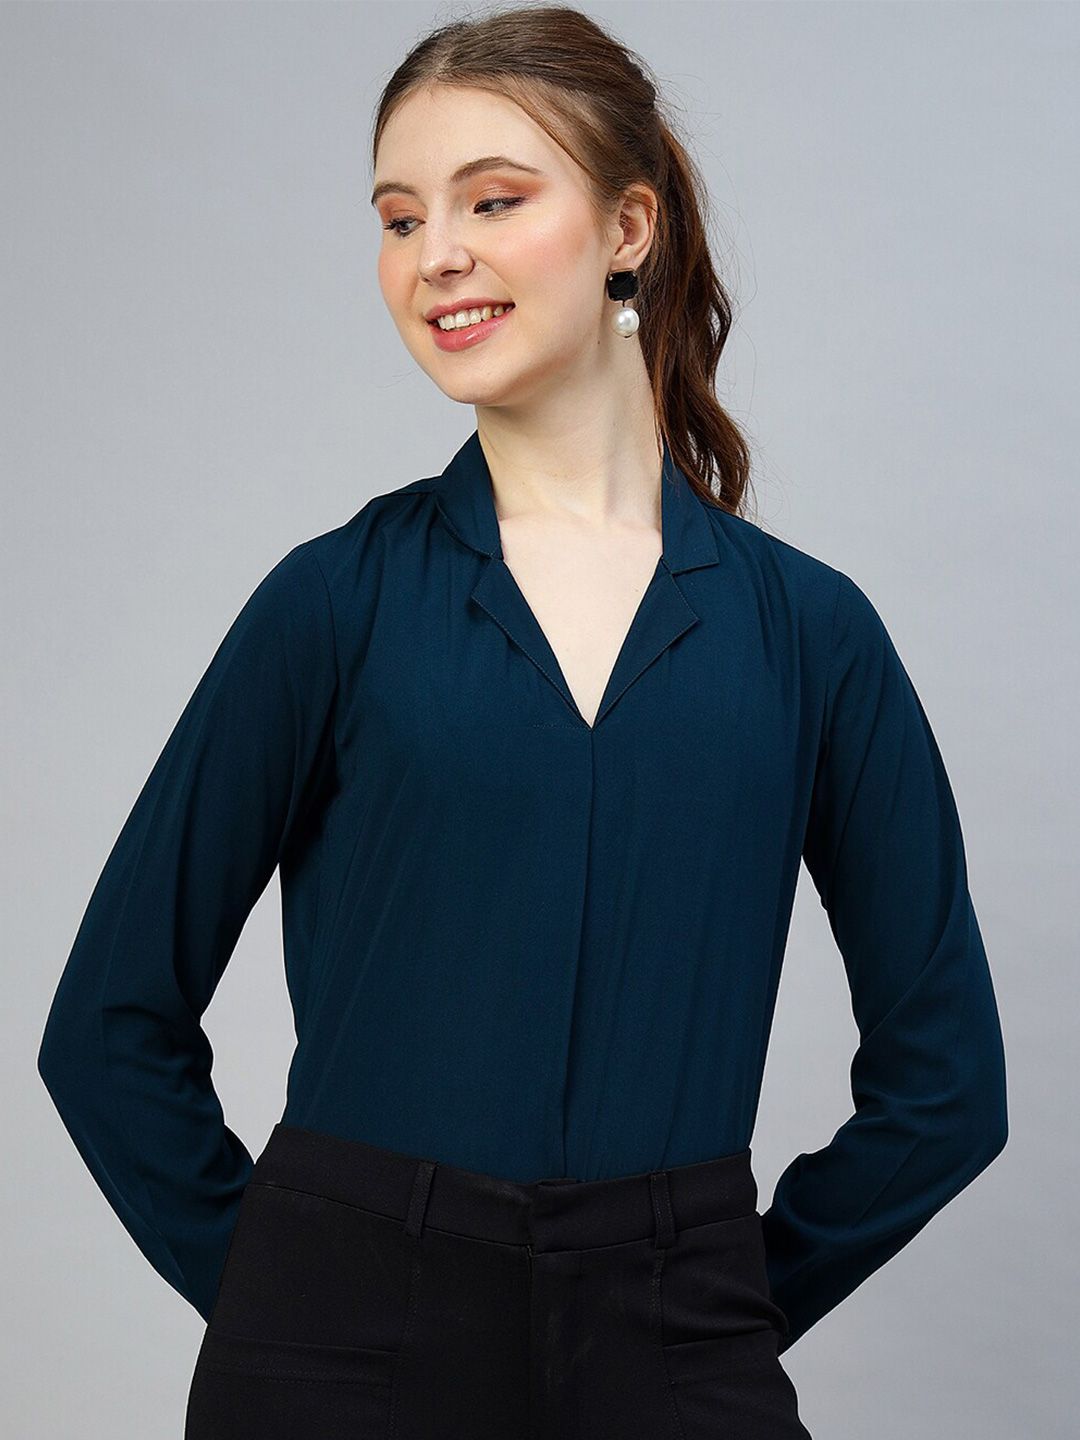 FITHUB Turquoise Blue Roll-Up Sleeves Shirt Style Top Price in India